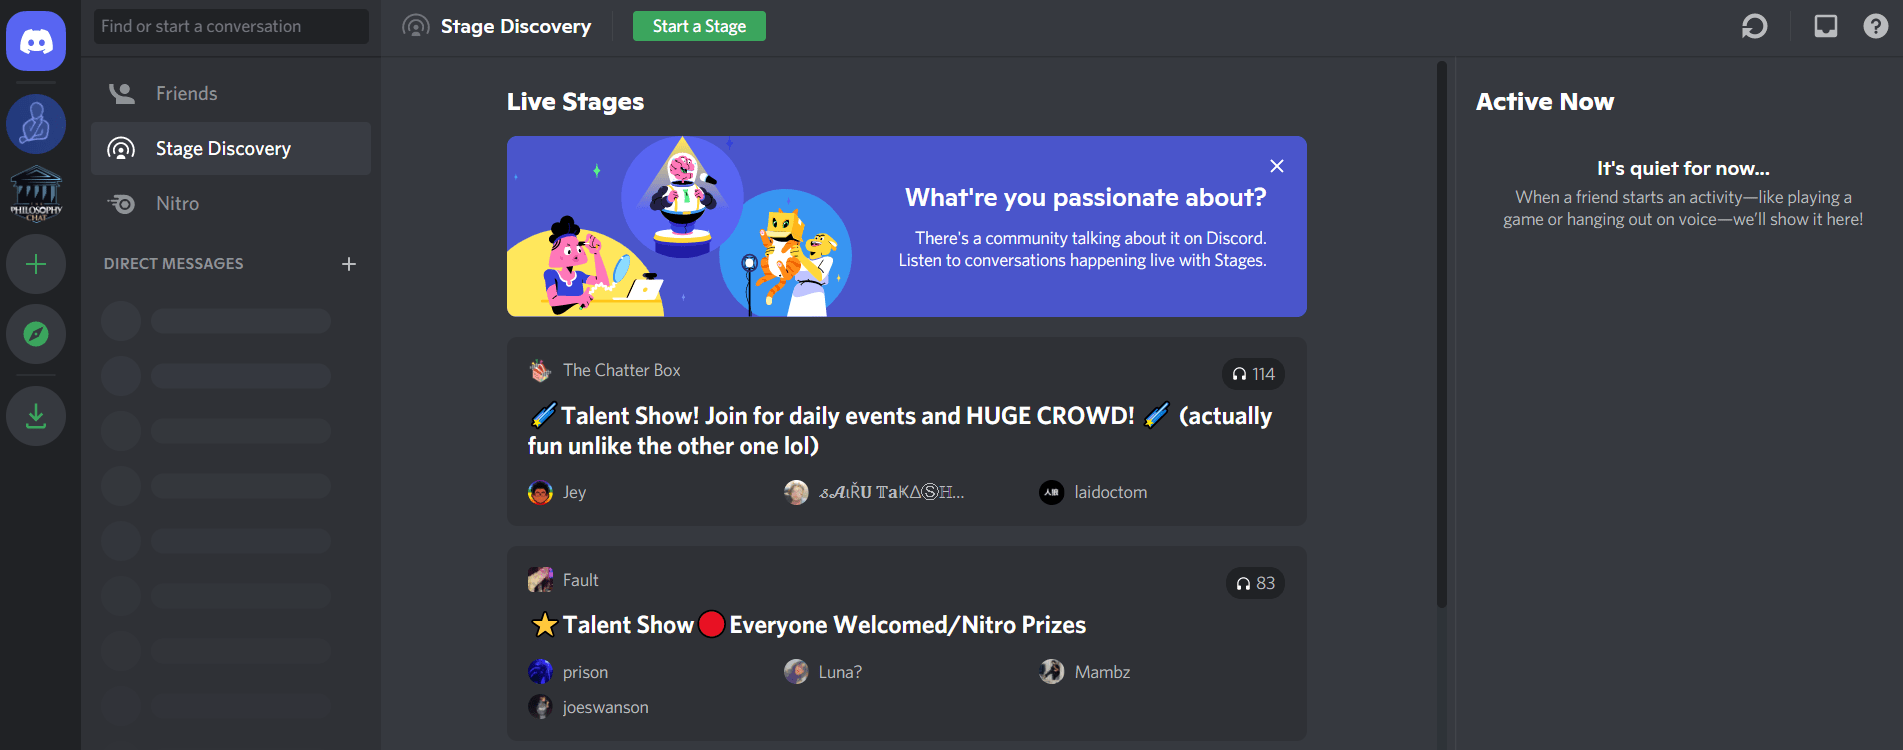 A Discord app interface showing Stage Discovery feature